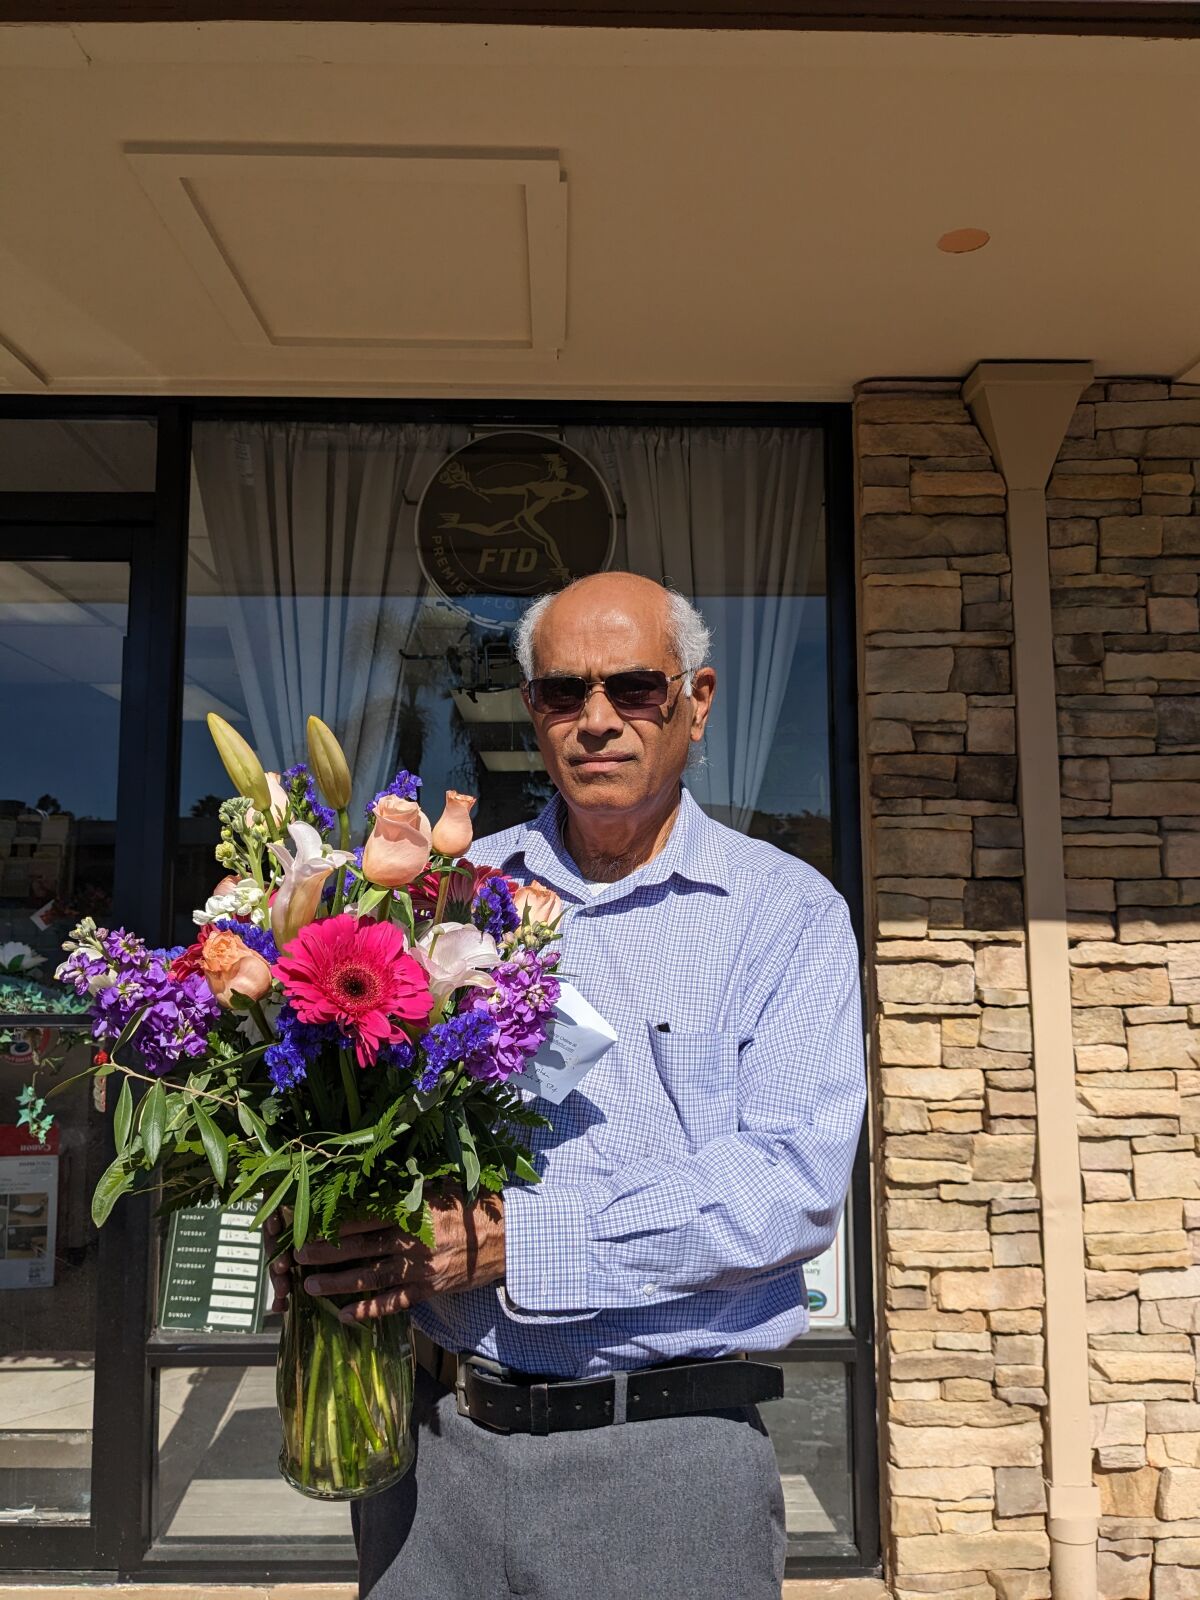 Naren Rathod, owner of Dhuns Poway Florist, poses with a bouquet in front of his shop as he prepares for Valentine’s Day.